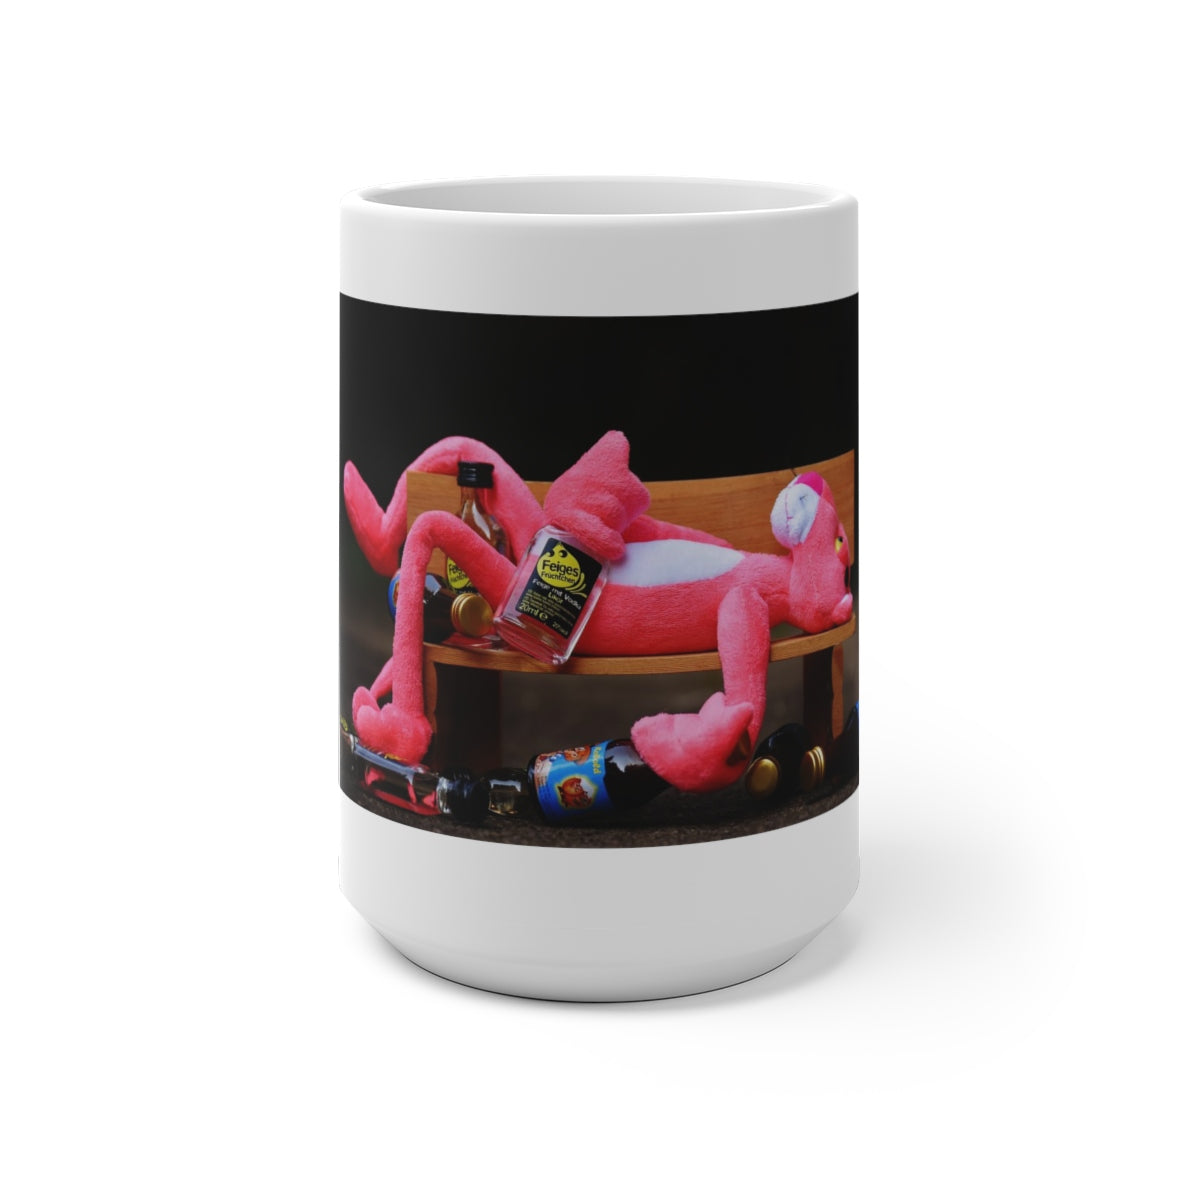 Five Toes Down Bad Day 2 Color Changing Mug